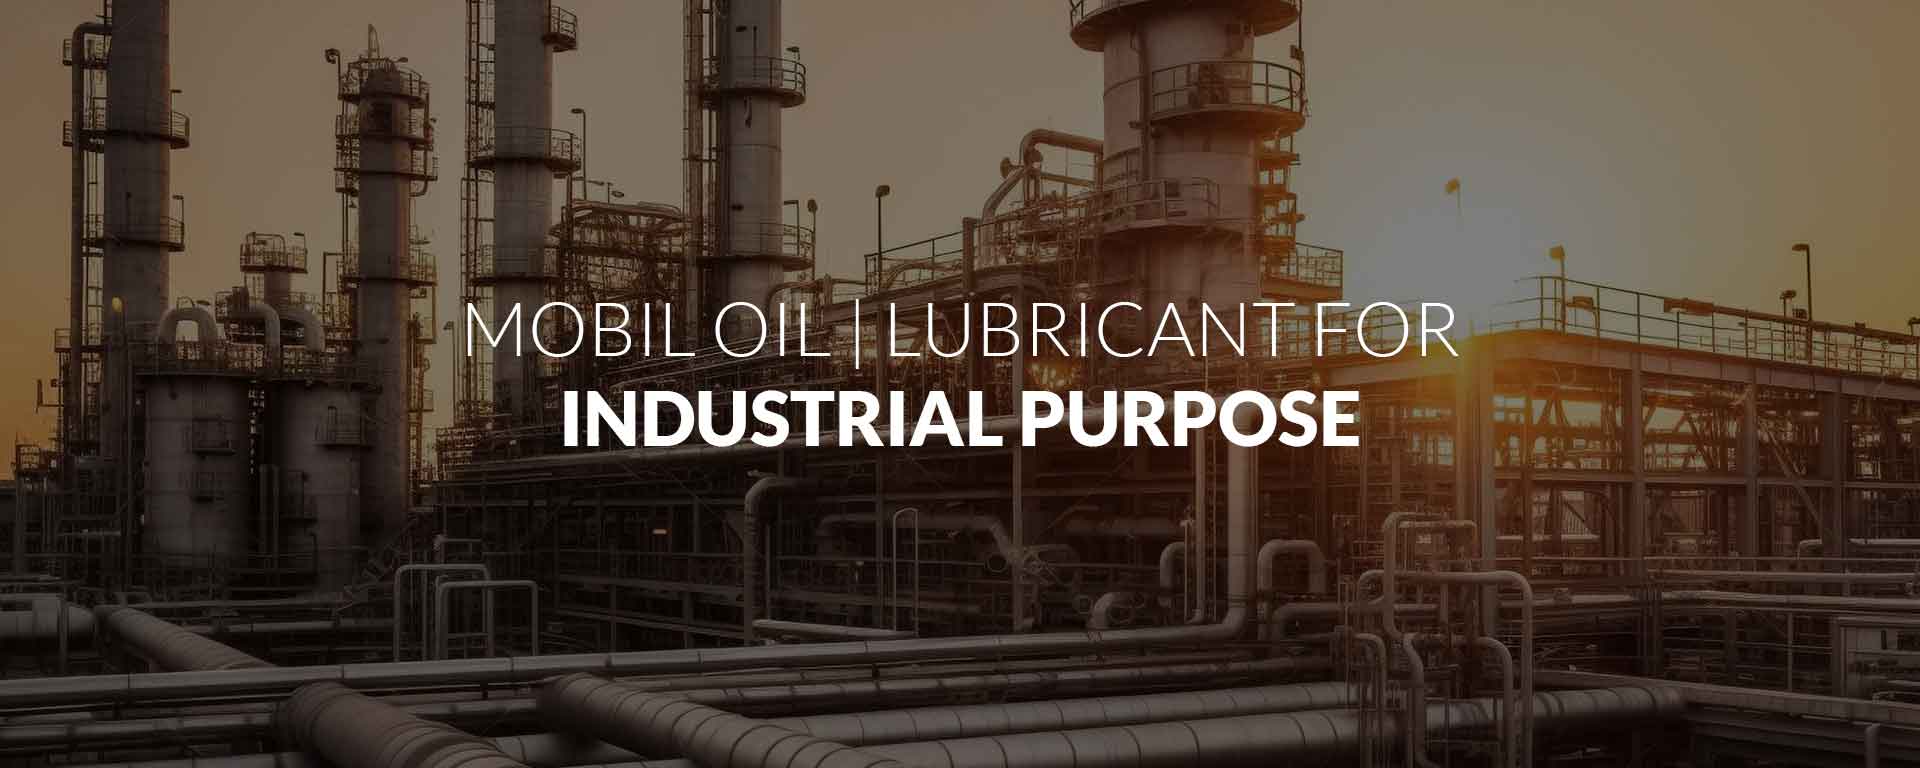 mobil-industrial-oil-and-lubricant-supplier-in-uae-and-middleeast